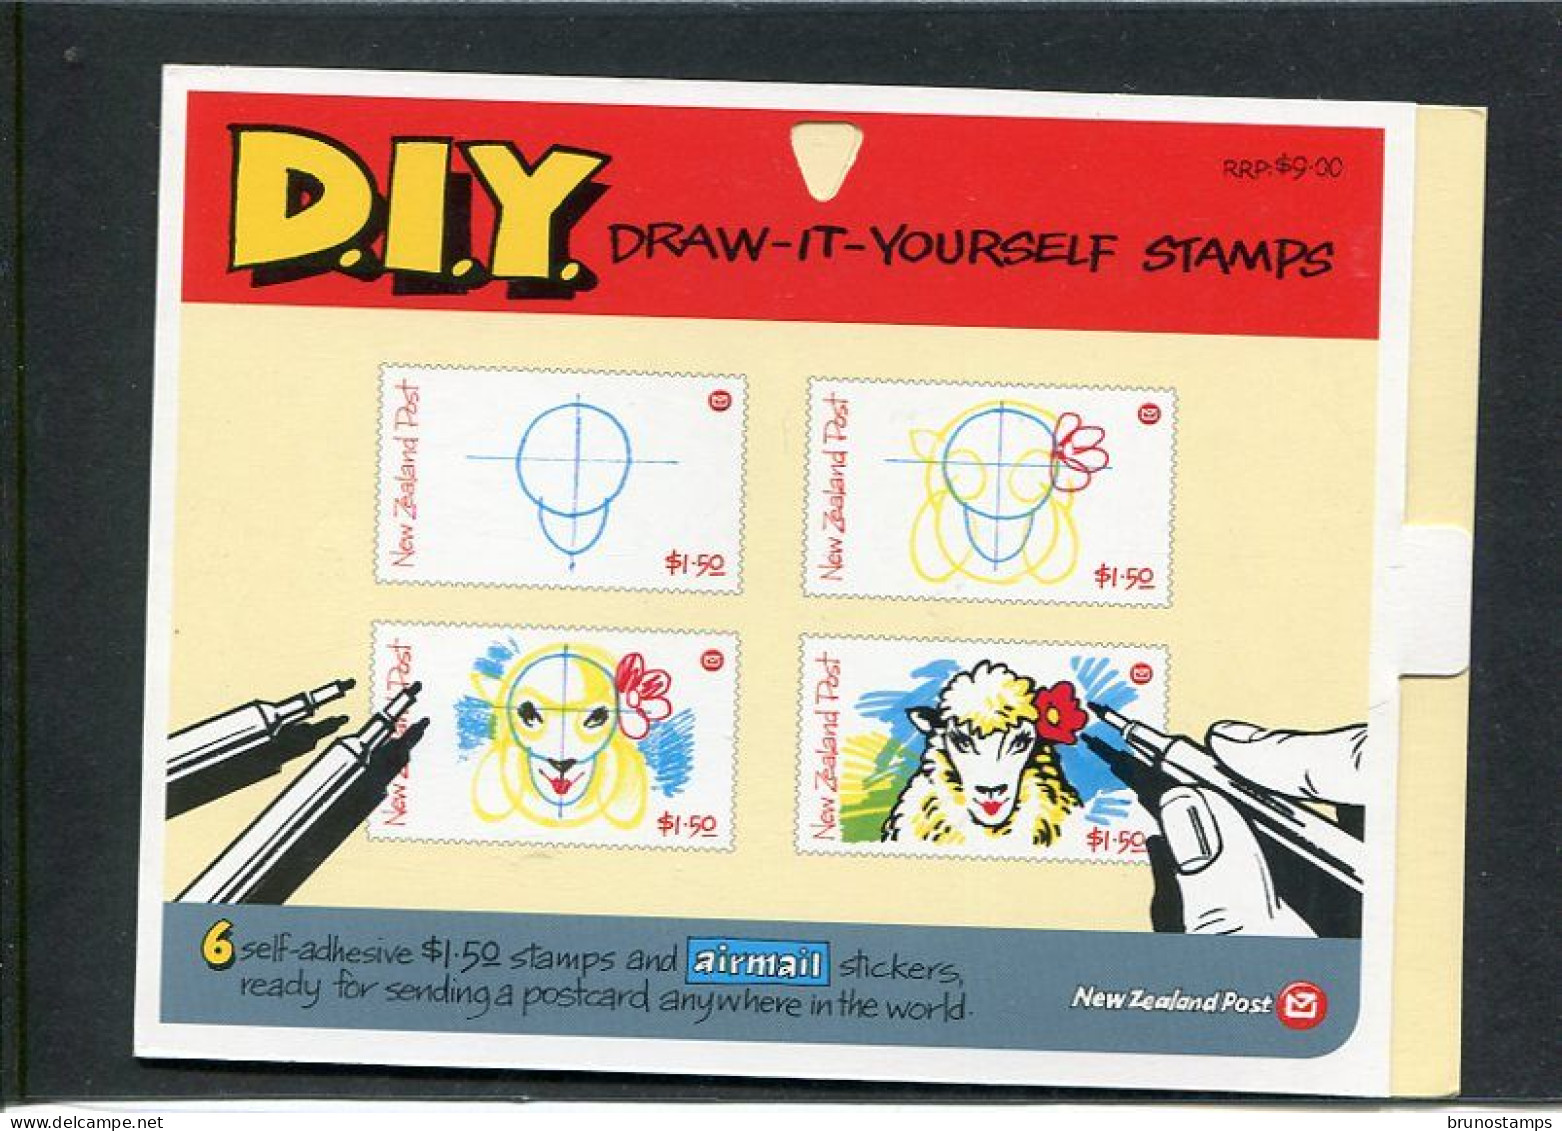 NEW ZEALAND - 2004  DRAW IT YOURSELF STAMPS  SELF ADHESIVE  SHEETLET  OF 6 MINT NH - Unused Stamps